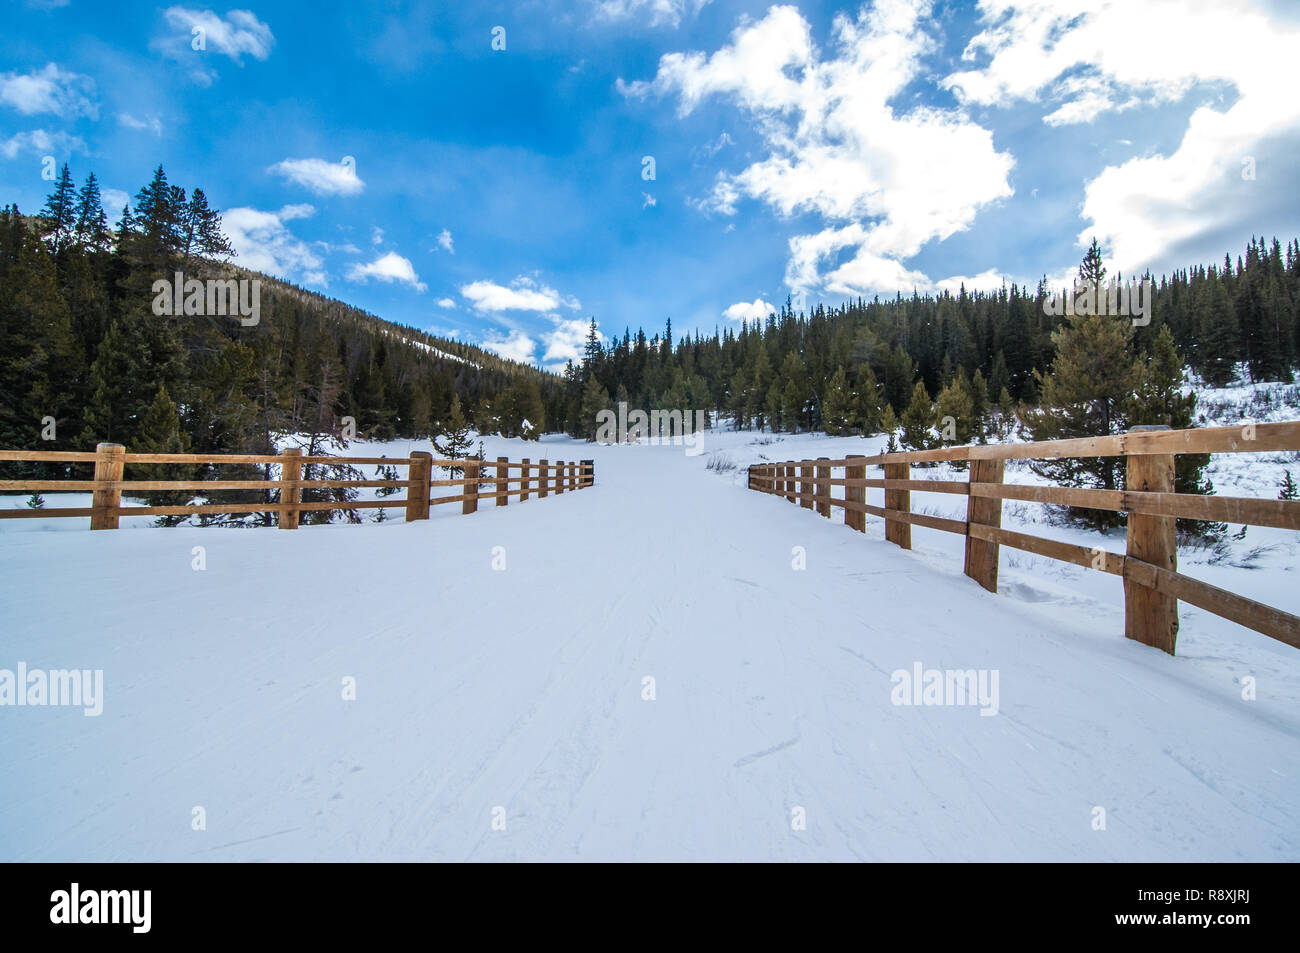 Photographed in Keystone, Colorado. Perfect place for skiing or snowboarding or other winter activities. Stock Photo